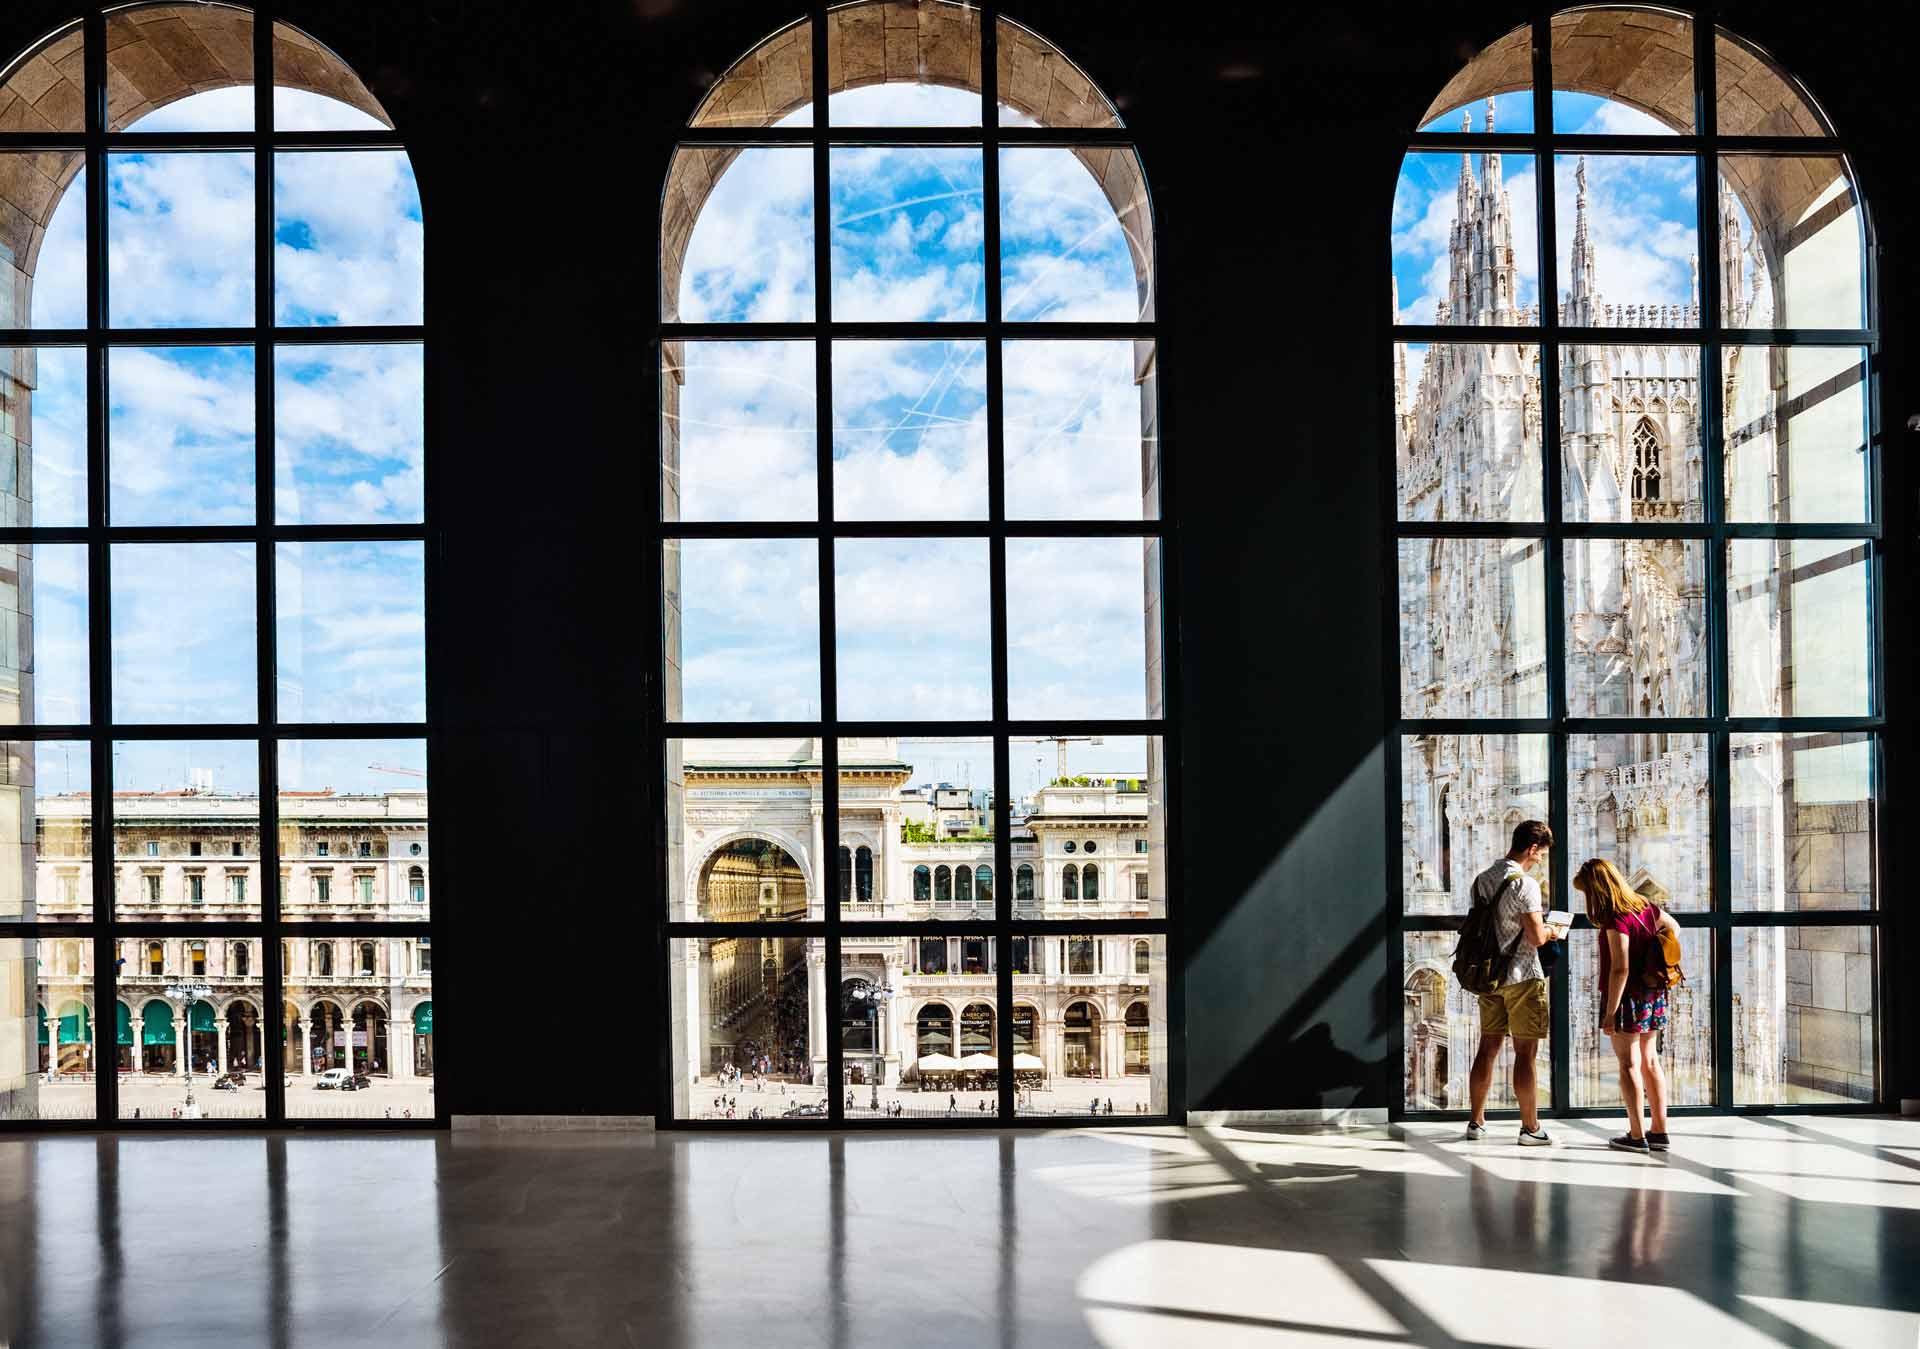 View of an important square in Milano from inside a building